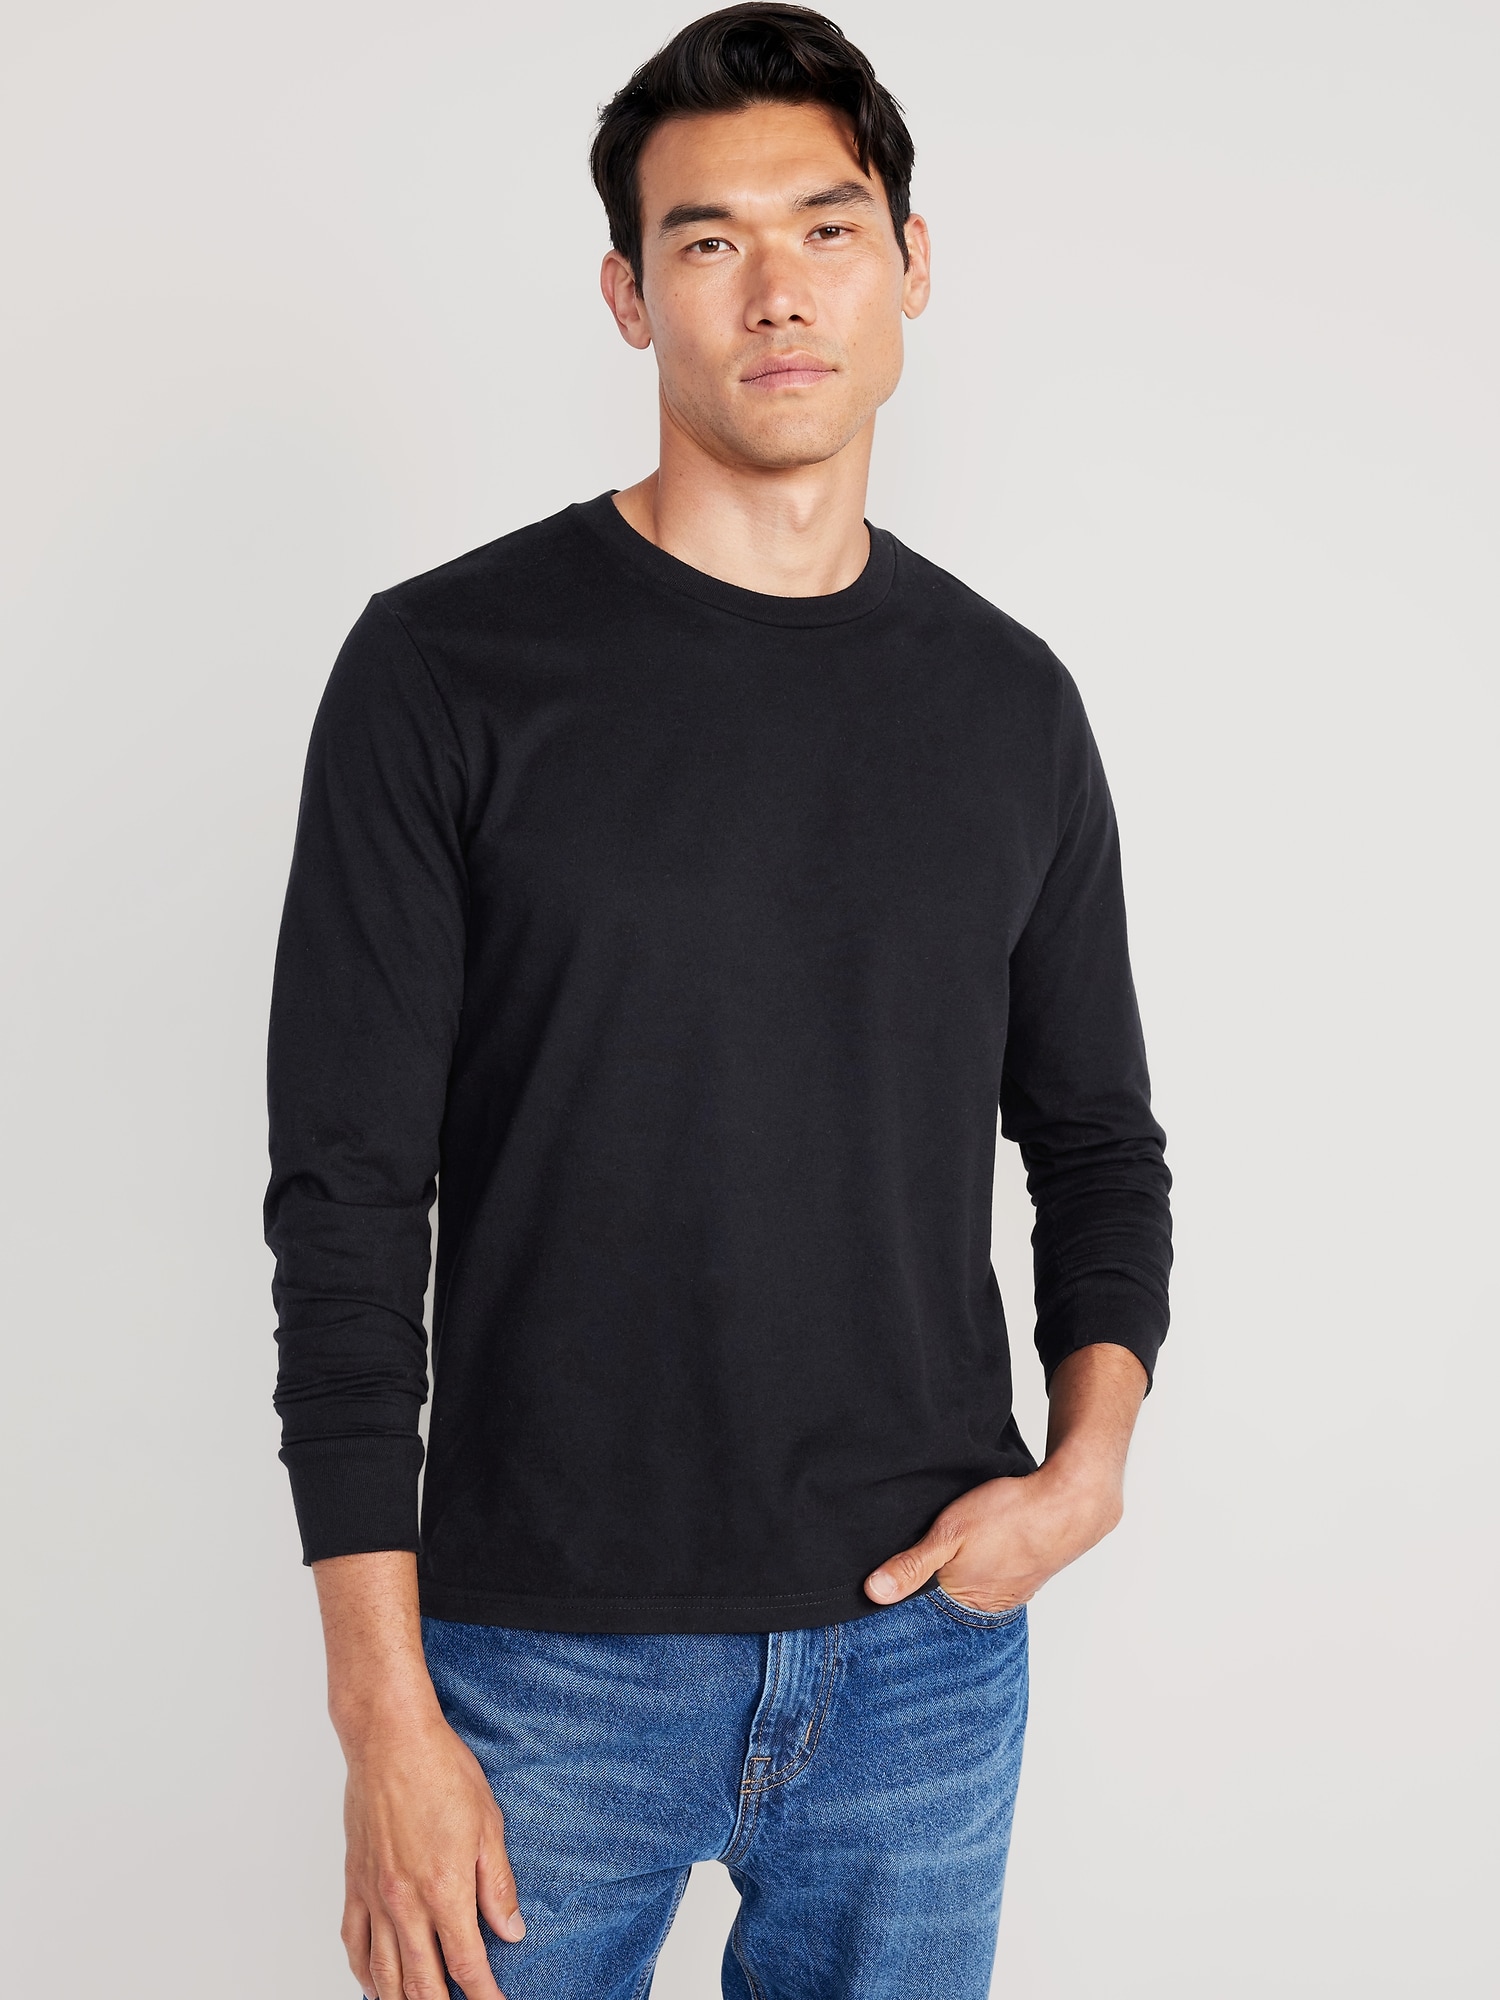 Soft-Washed Rotation T-Shirt | Old Navy